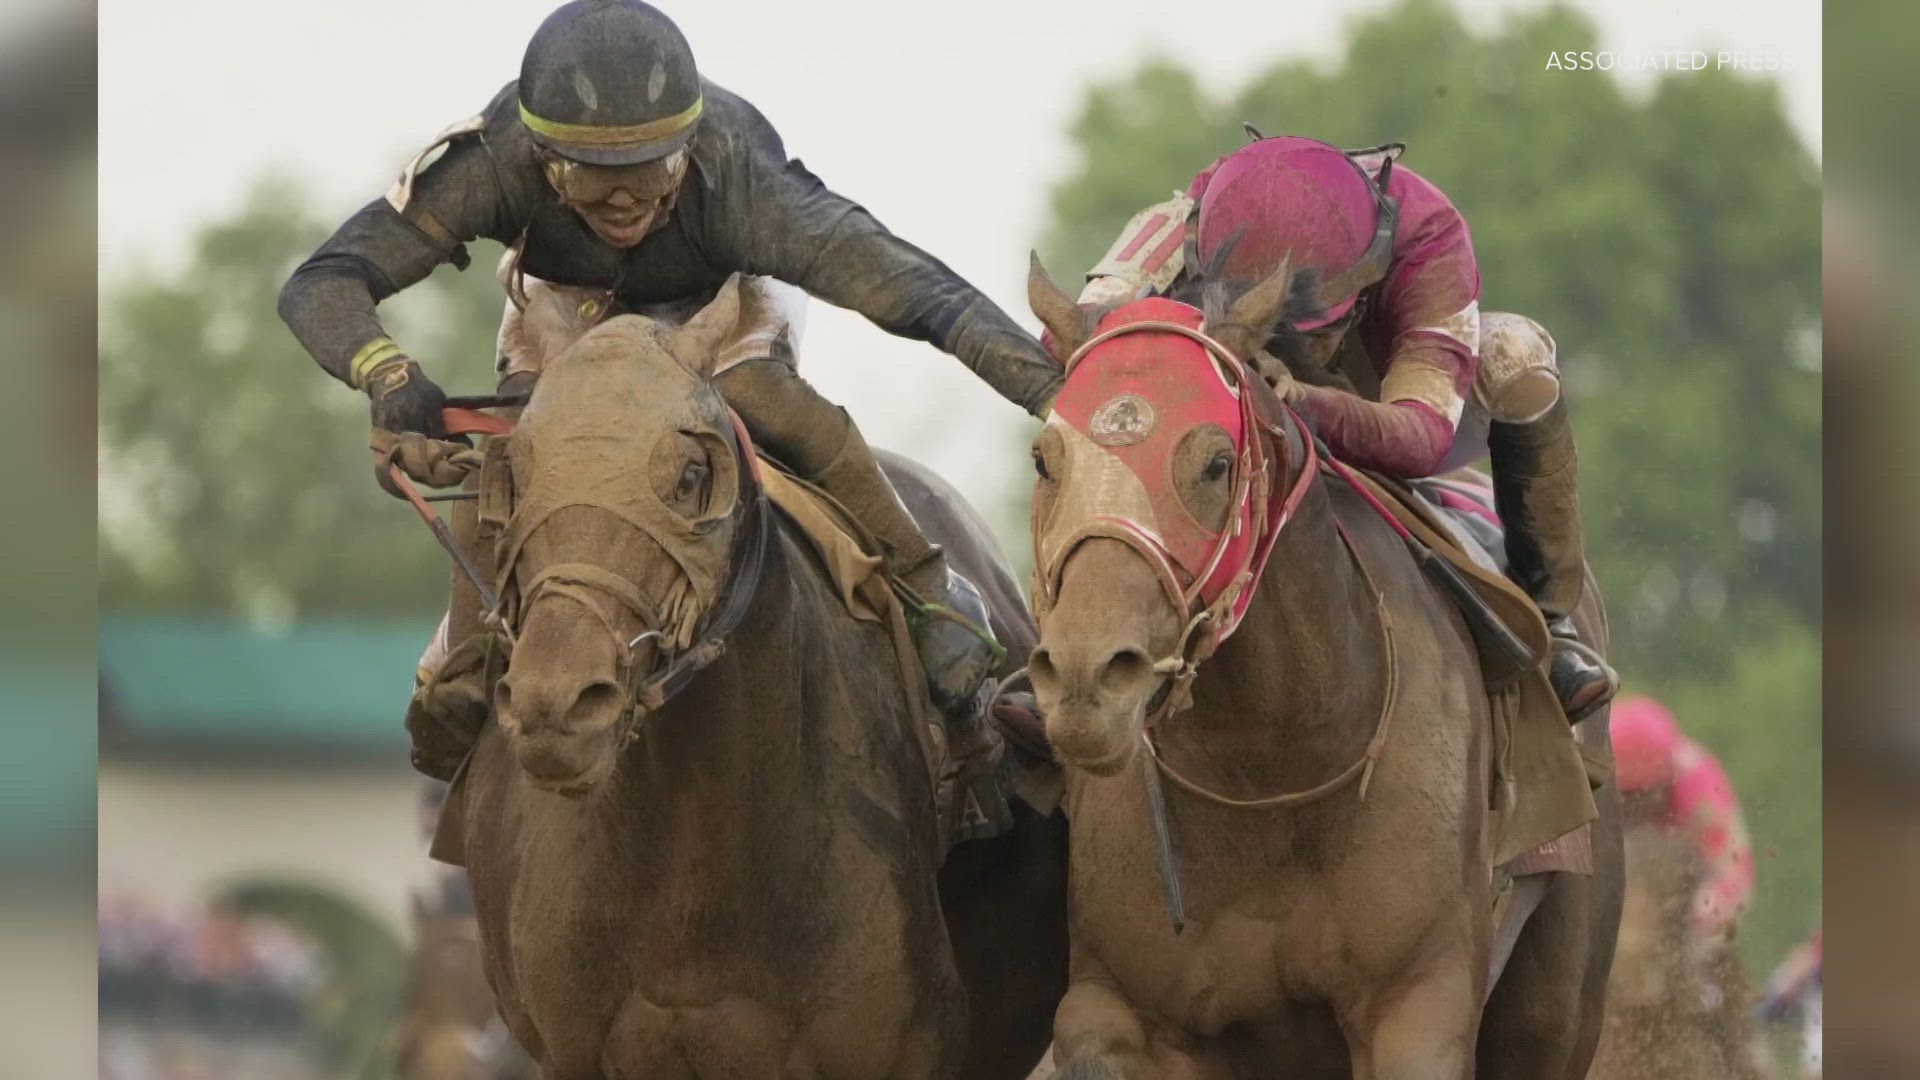 The Kentucky Horse Racing Commission is reviewing the conduct of the jockey aboard the Kentucky Derby's second place finisher Sierra Leone.